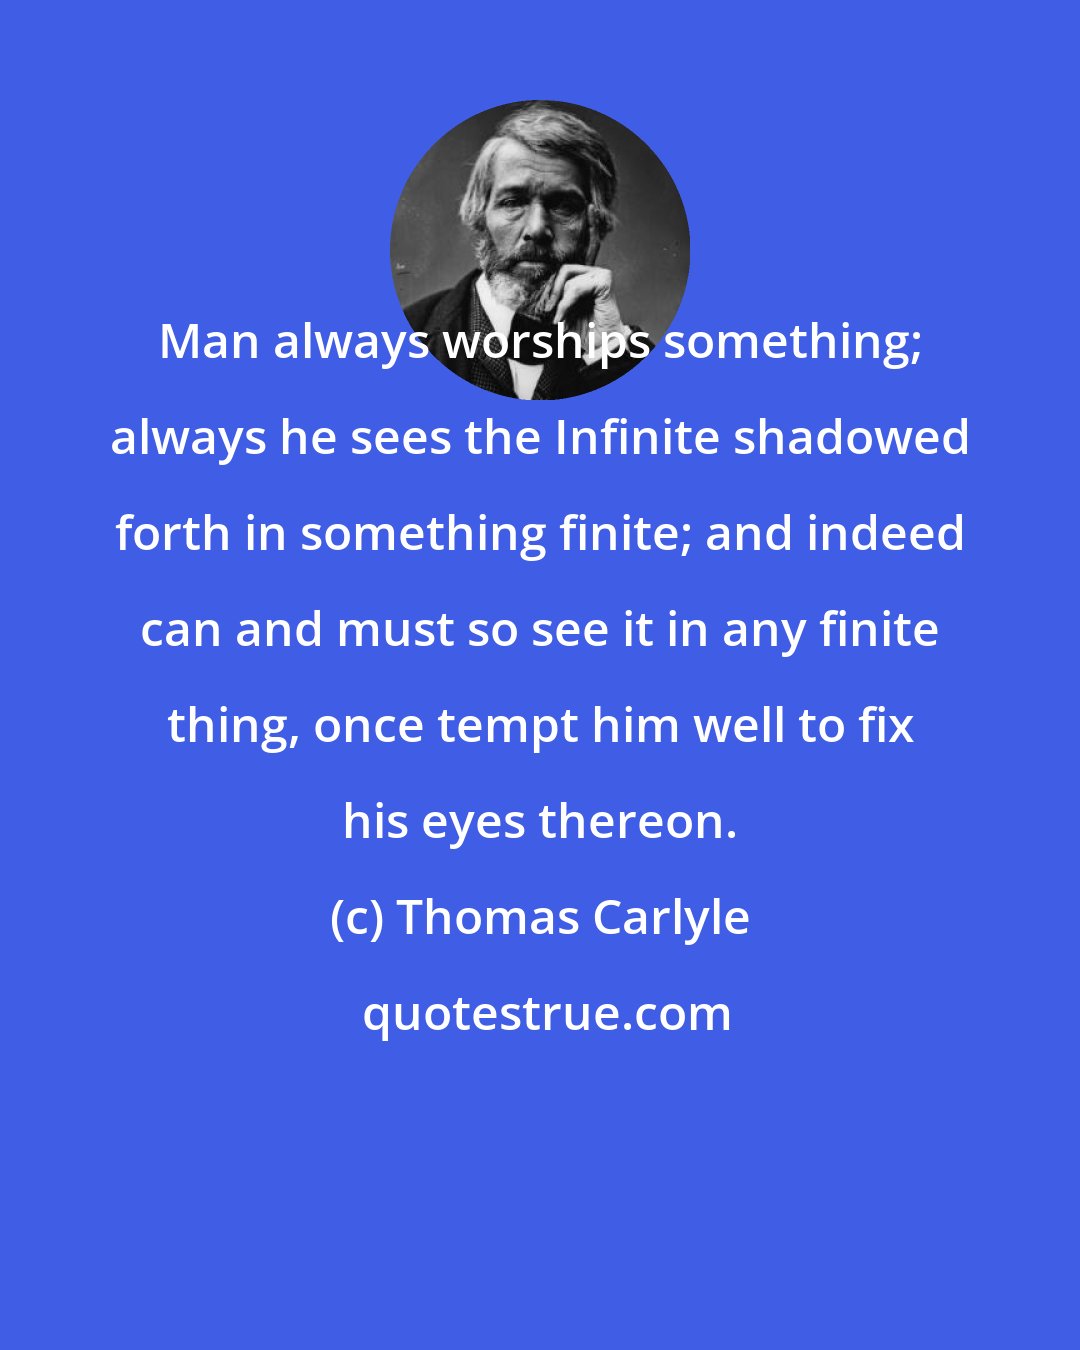 Thomas Carlyle: Man always worships something; always he sees the Infinite shadowed forth in something finite; and indeed can and must so see it in any finite thing, once tempt him well to fix his eyes thereon.